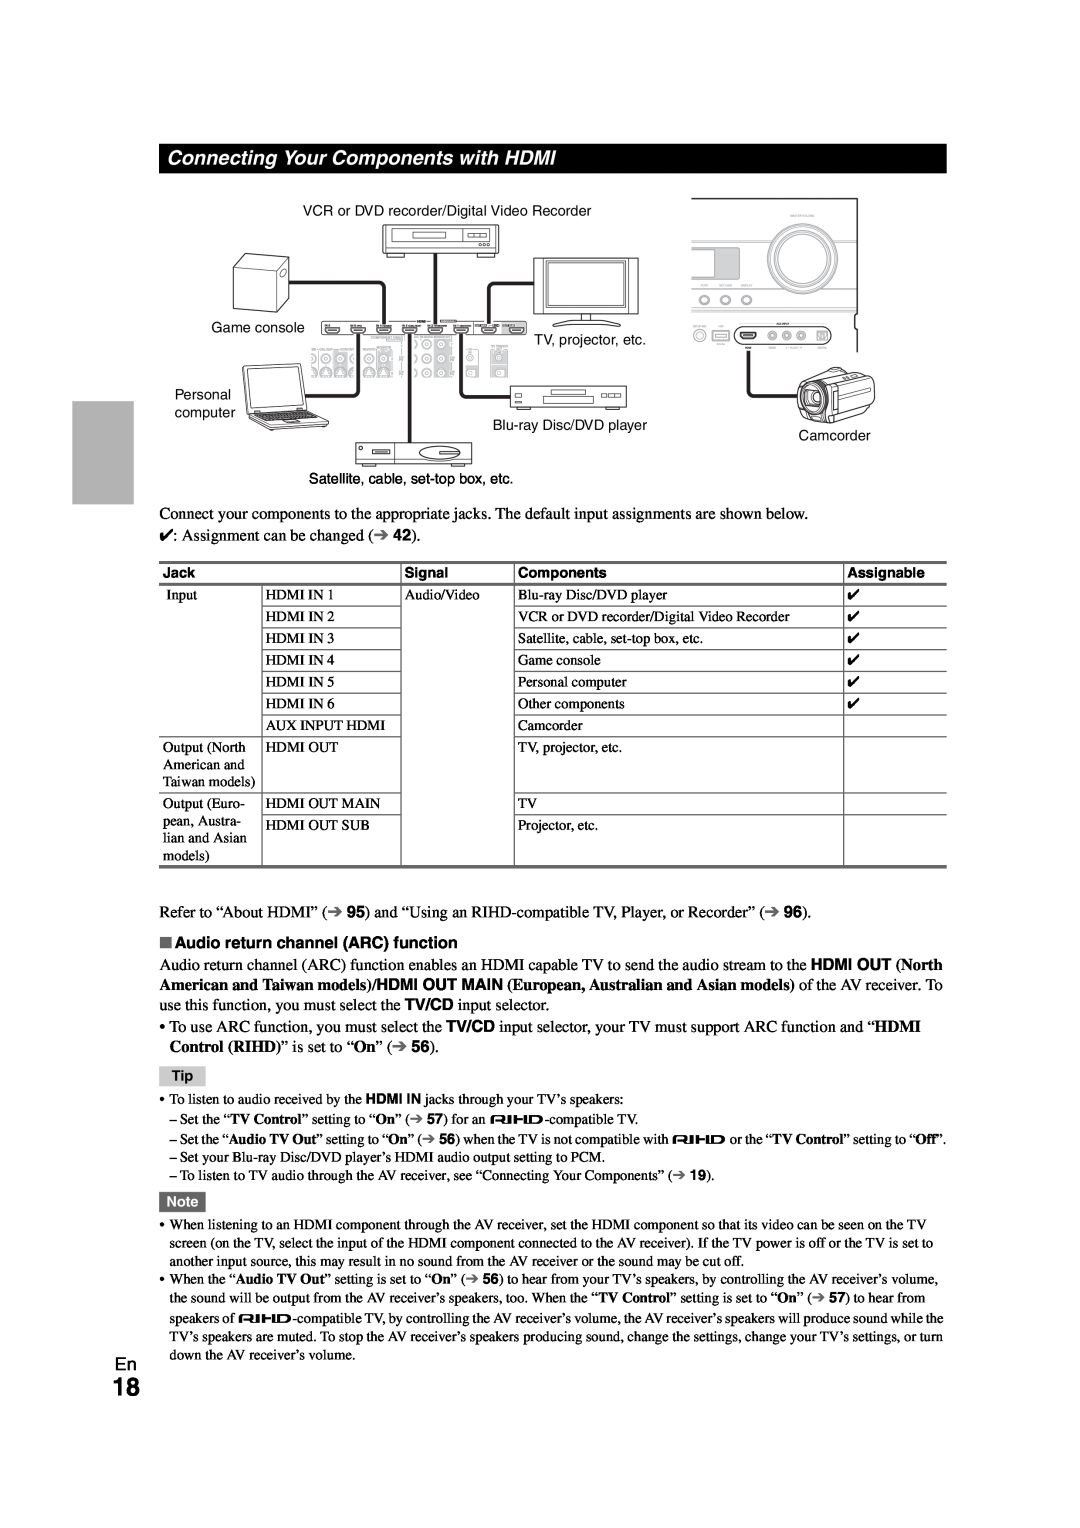 Onkyo TX-NR808 instruction manual Connecting Your Components with HDMI, Audio return channel ARC function 